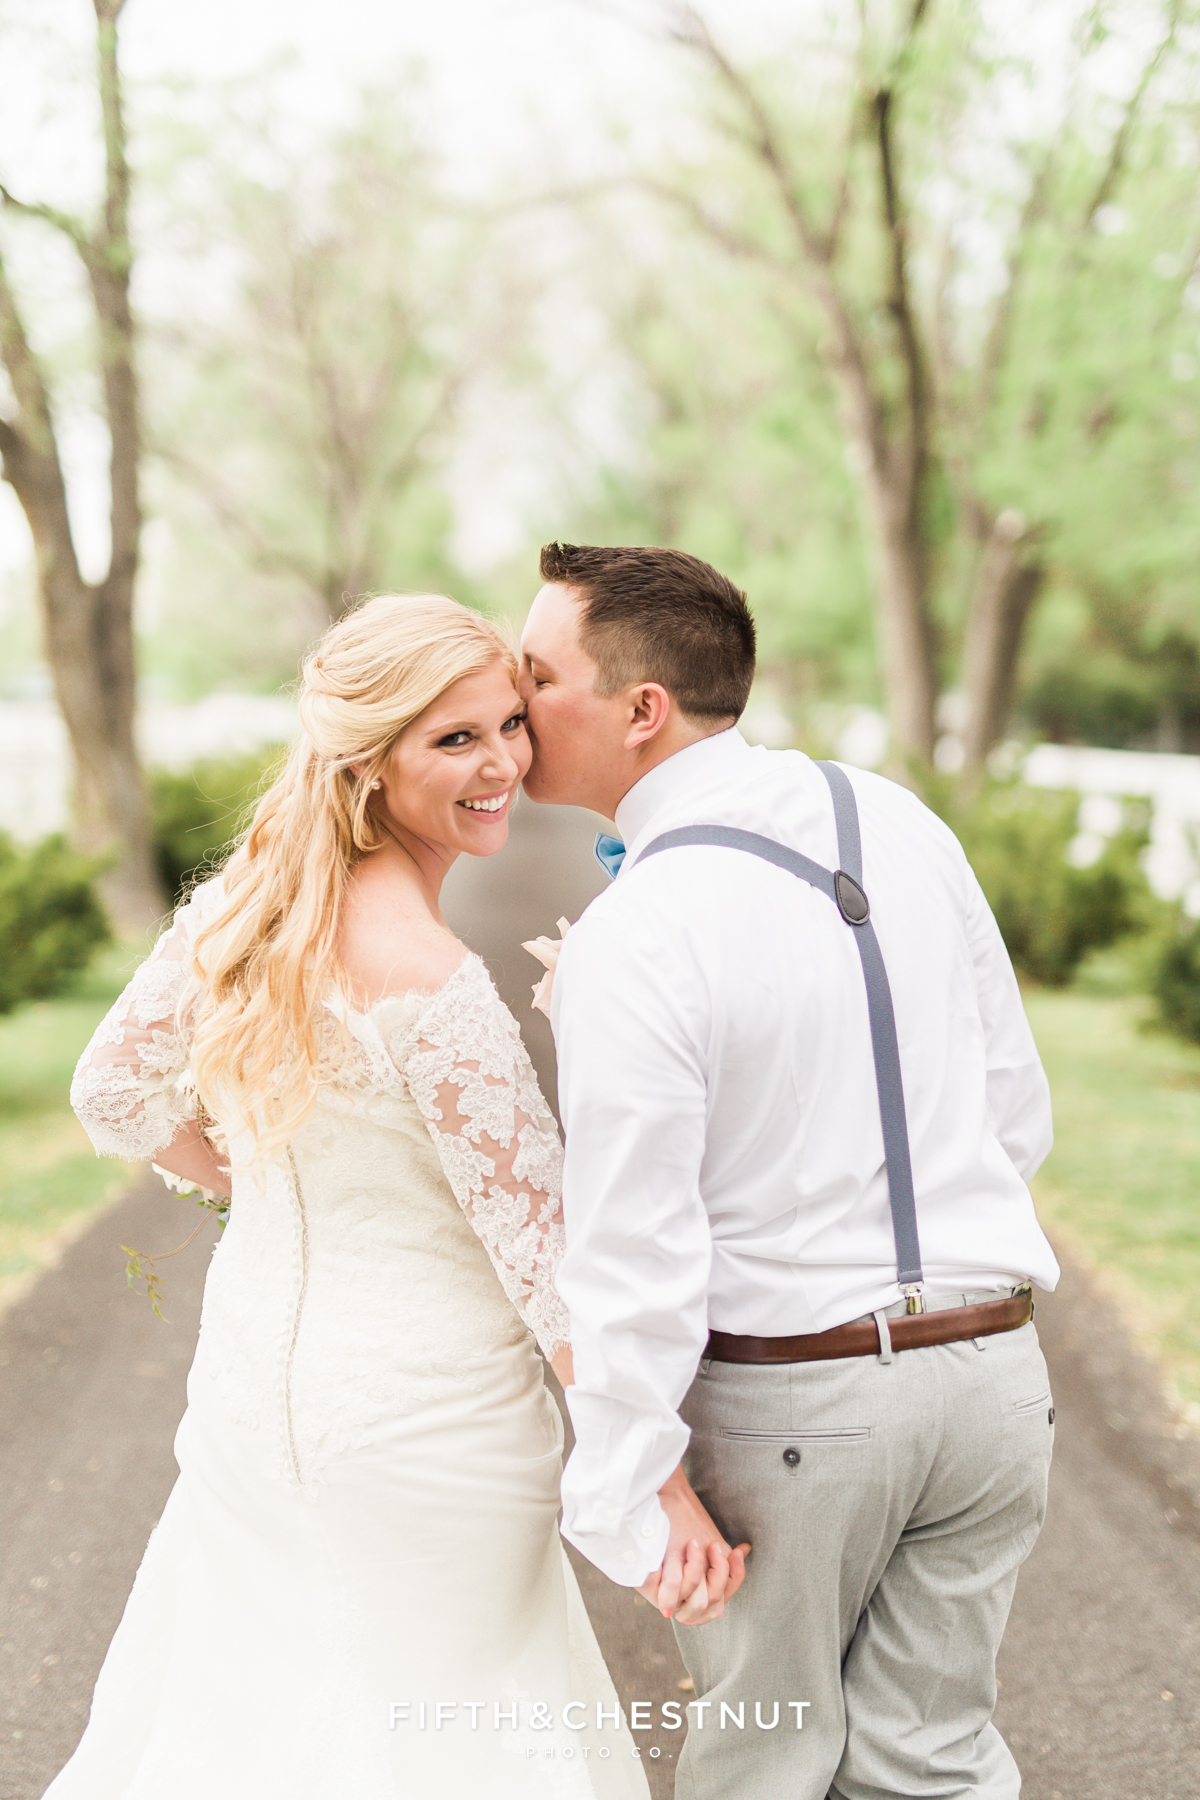 Bride laughing as her groom kisses her cheek as they walk down an oak-lined path